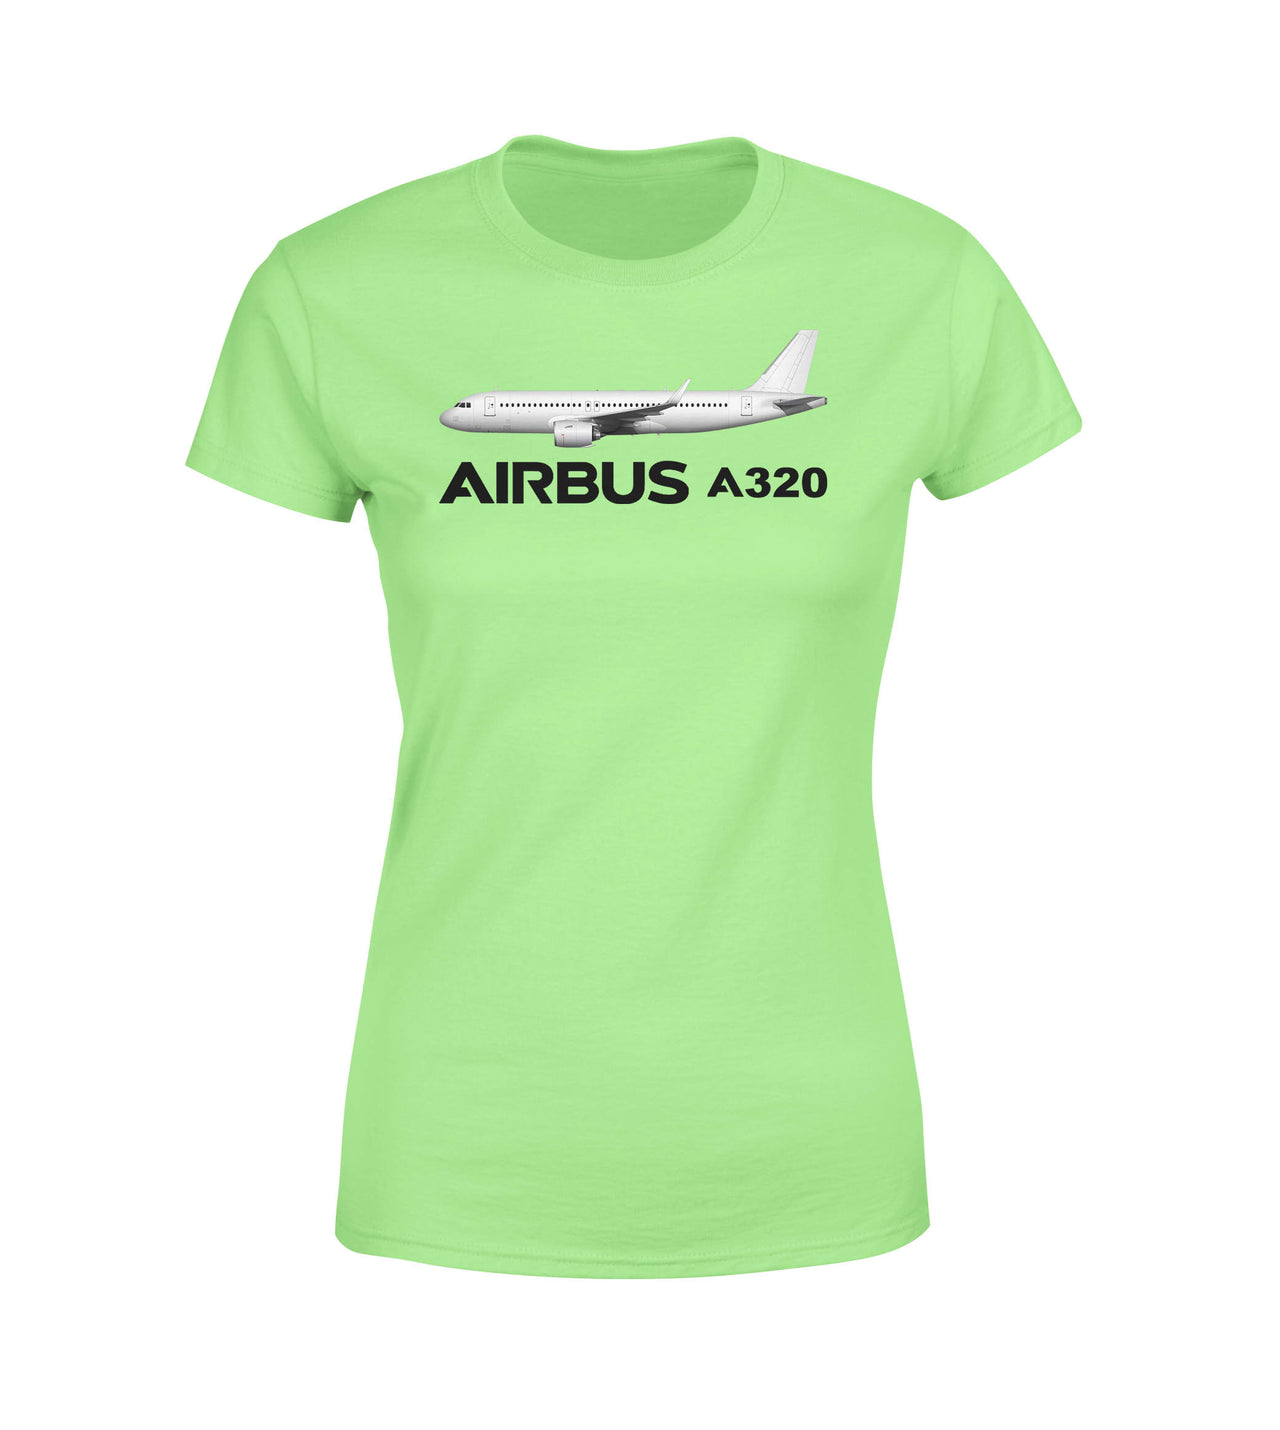 The Airbus A320 Designed Women T-Shirts